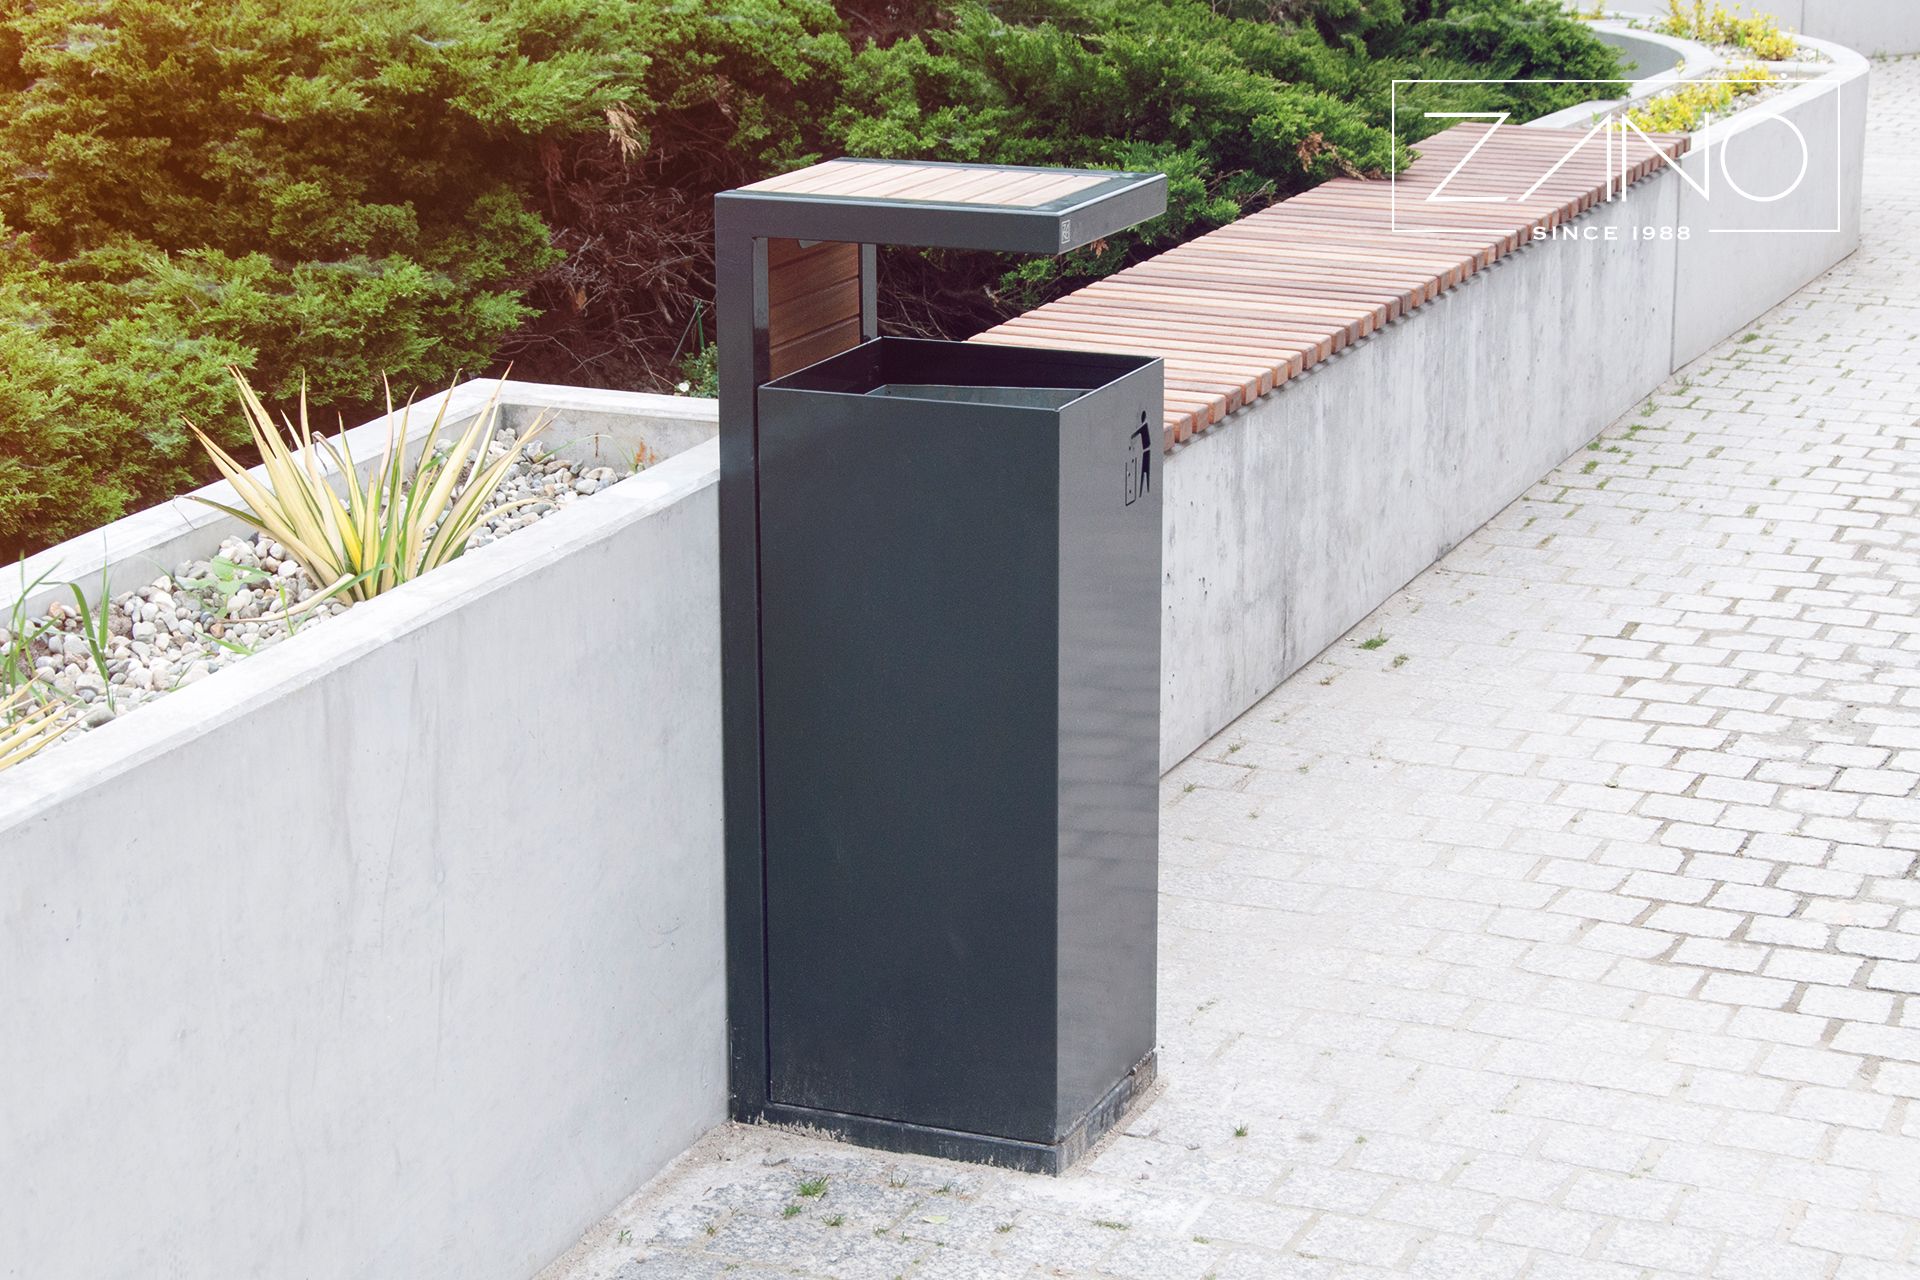 Litter bin made of painted carbon steel